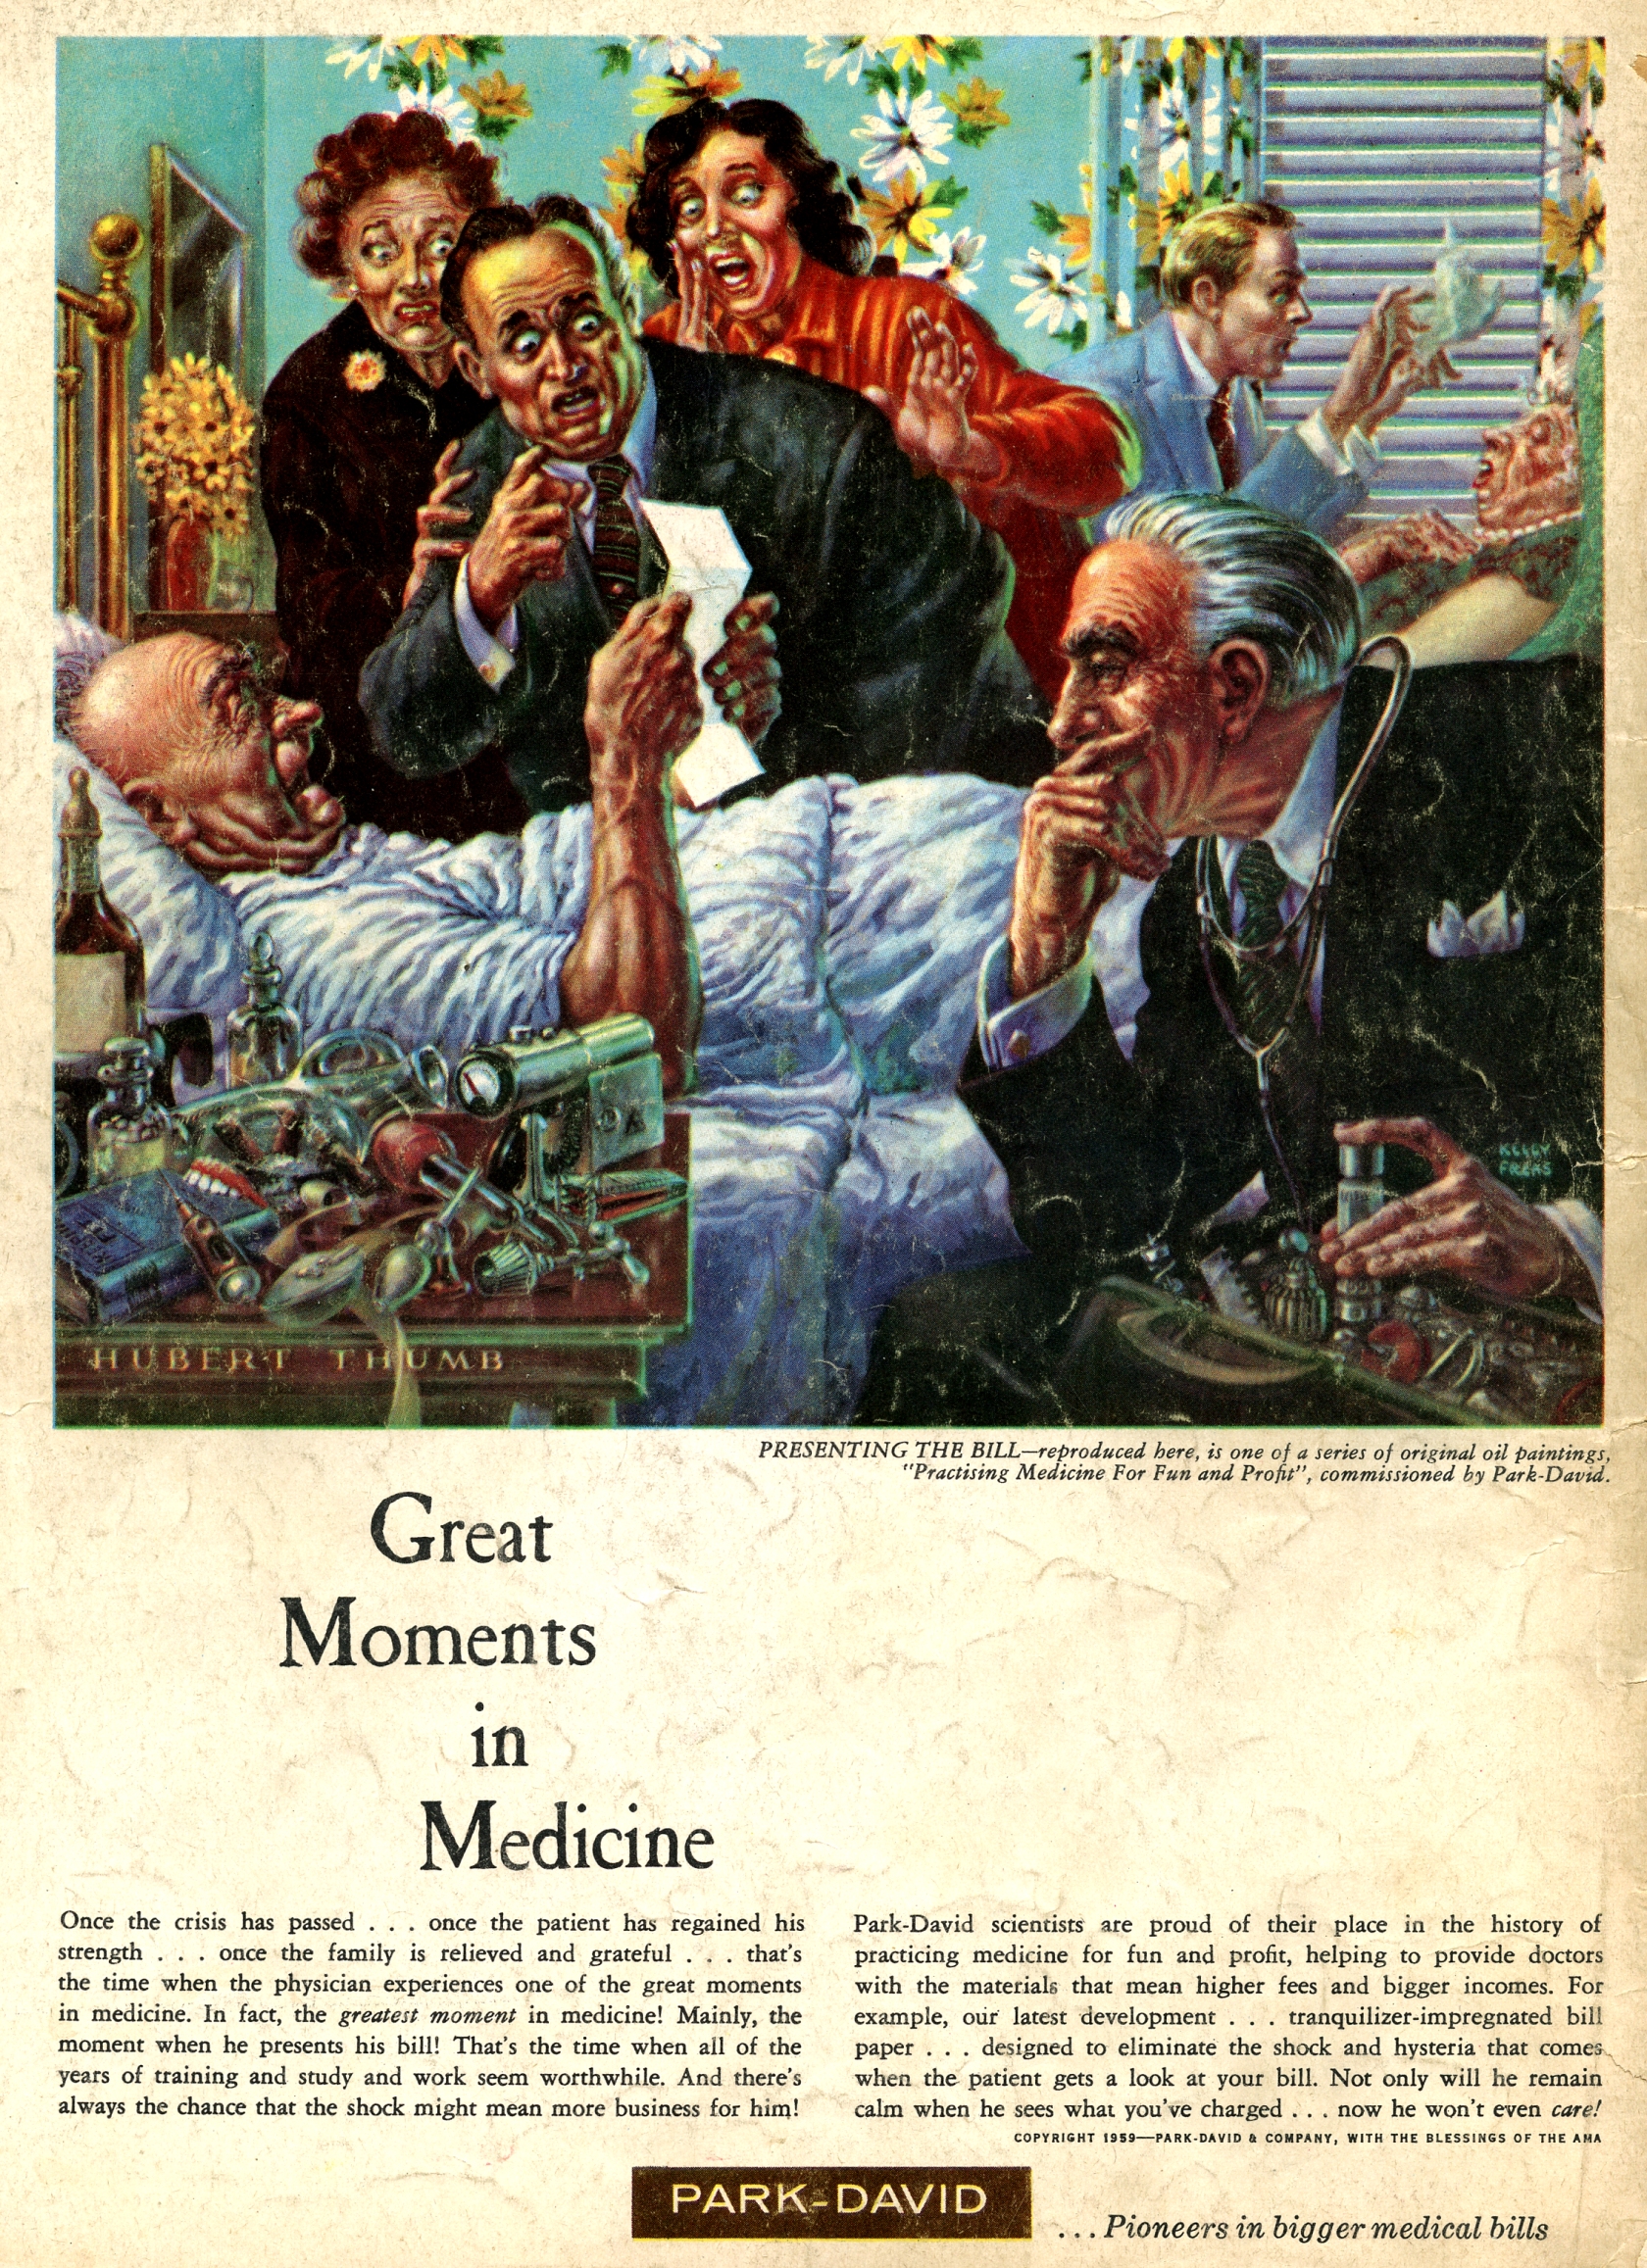 Great Moments in Medicine@Mad by Kelly Freas,1970.jpg